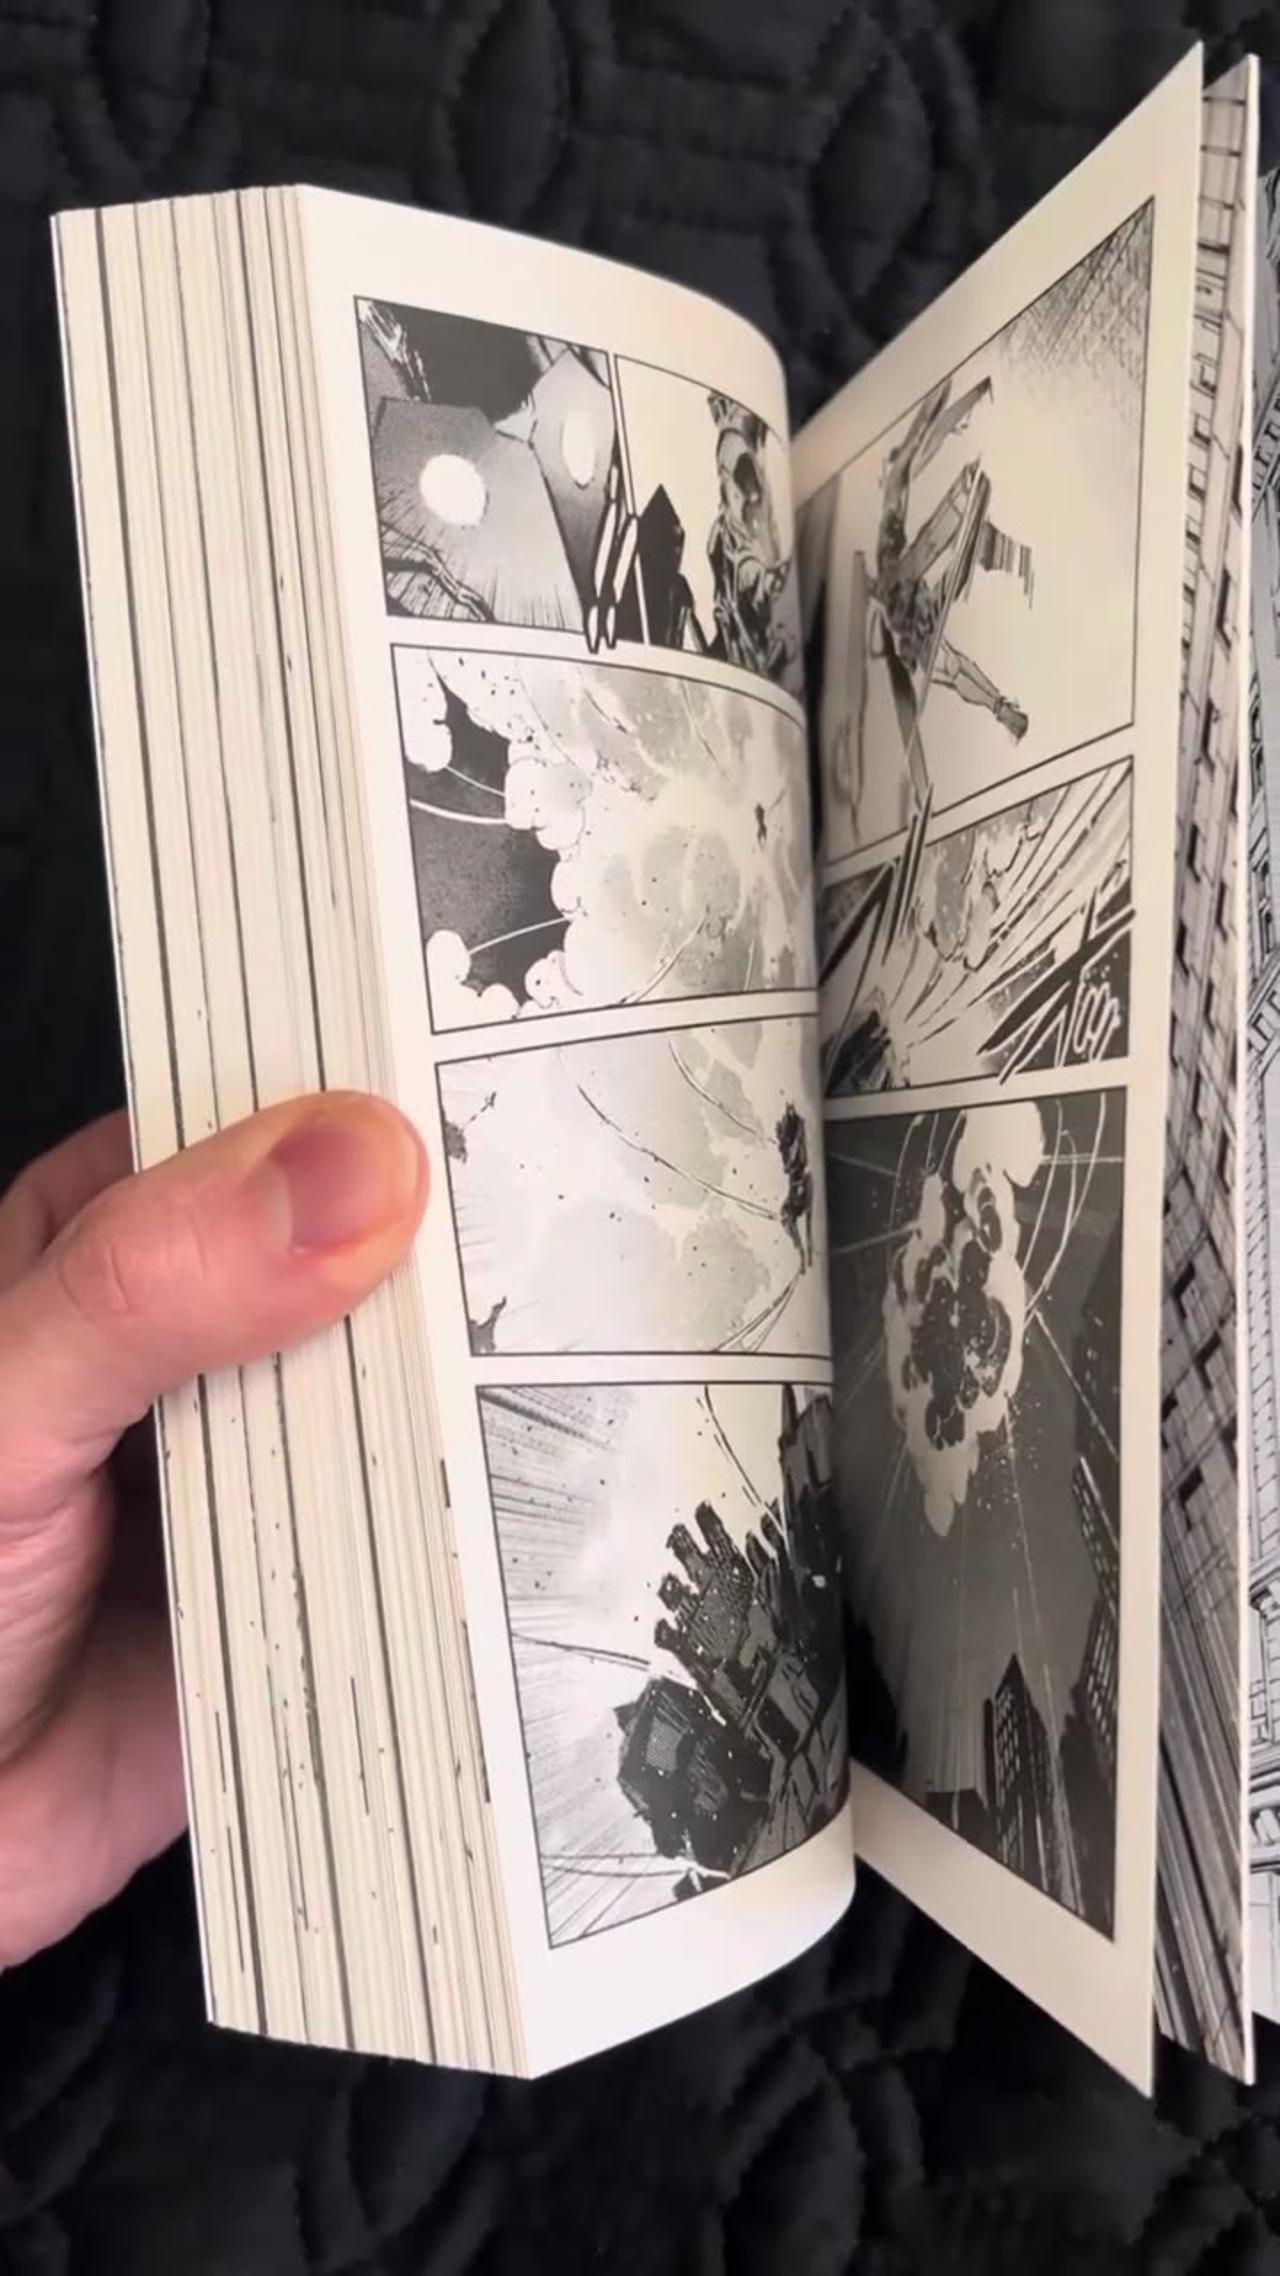 Quick Review of the Batman Manga “Justice Buster” Volume 1